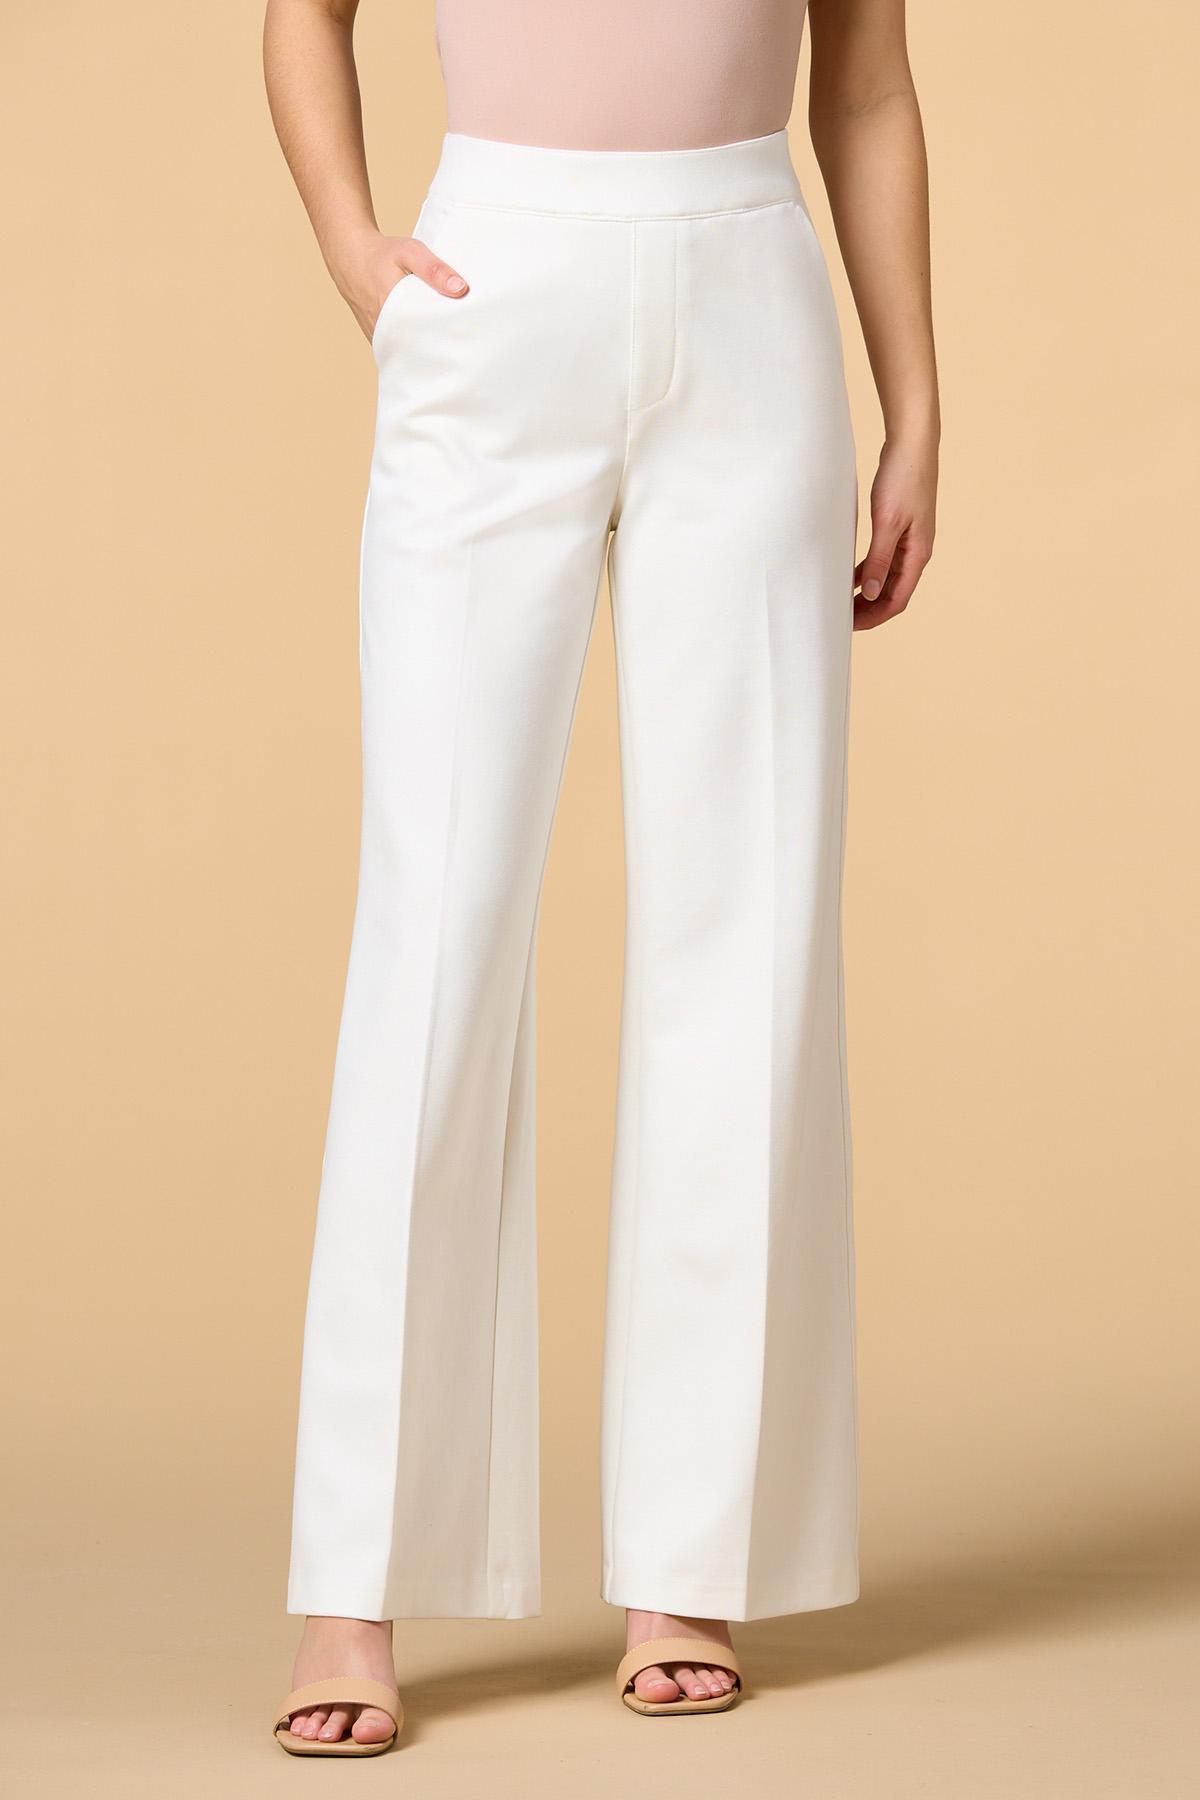 Stretch You Out Flare Pants